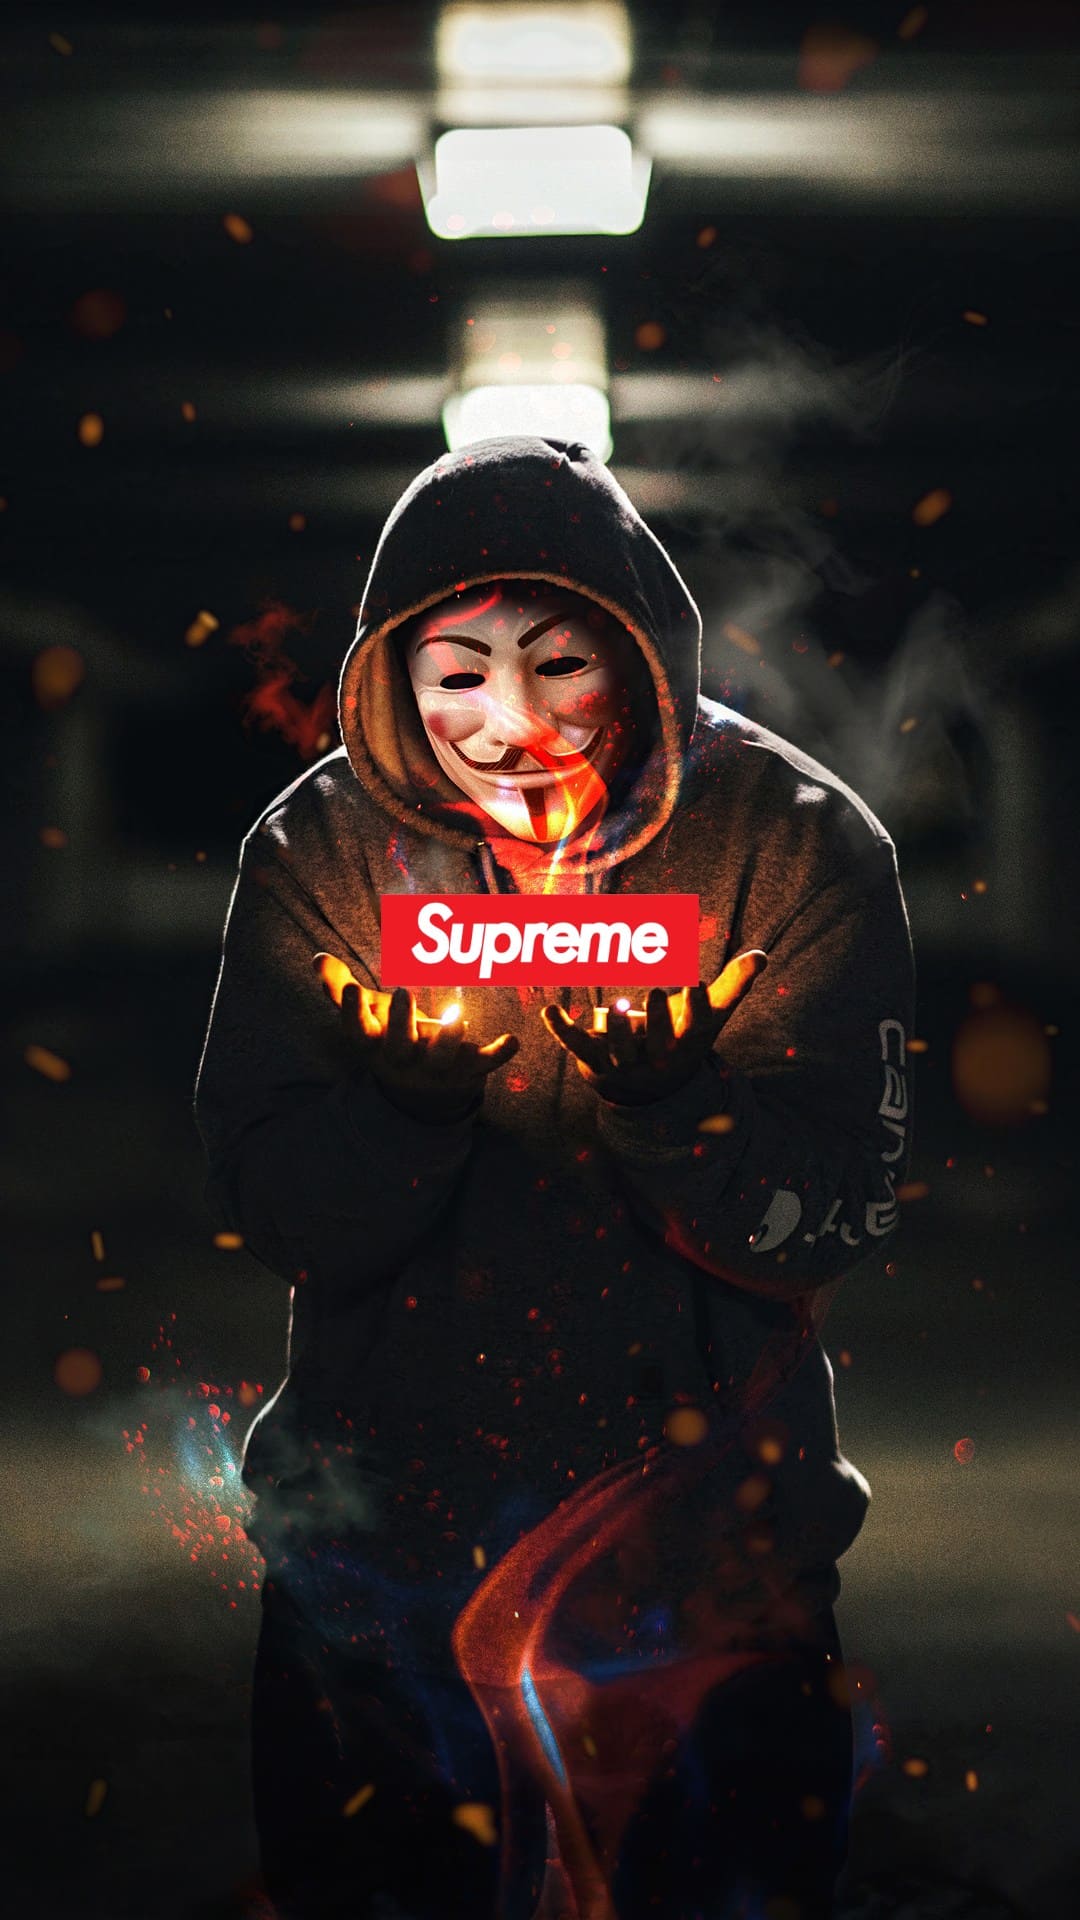 Supreme HD Wallpapers - Top Best Ultra HD Supreme Backgrounds